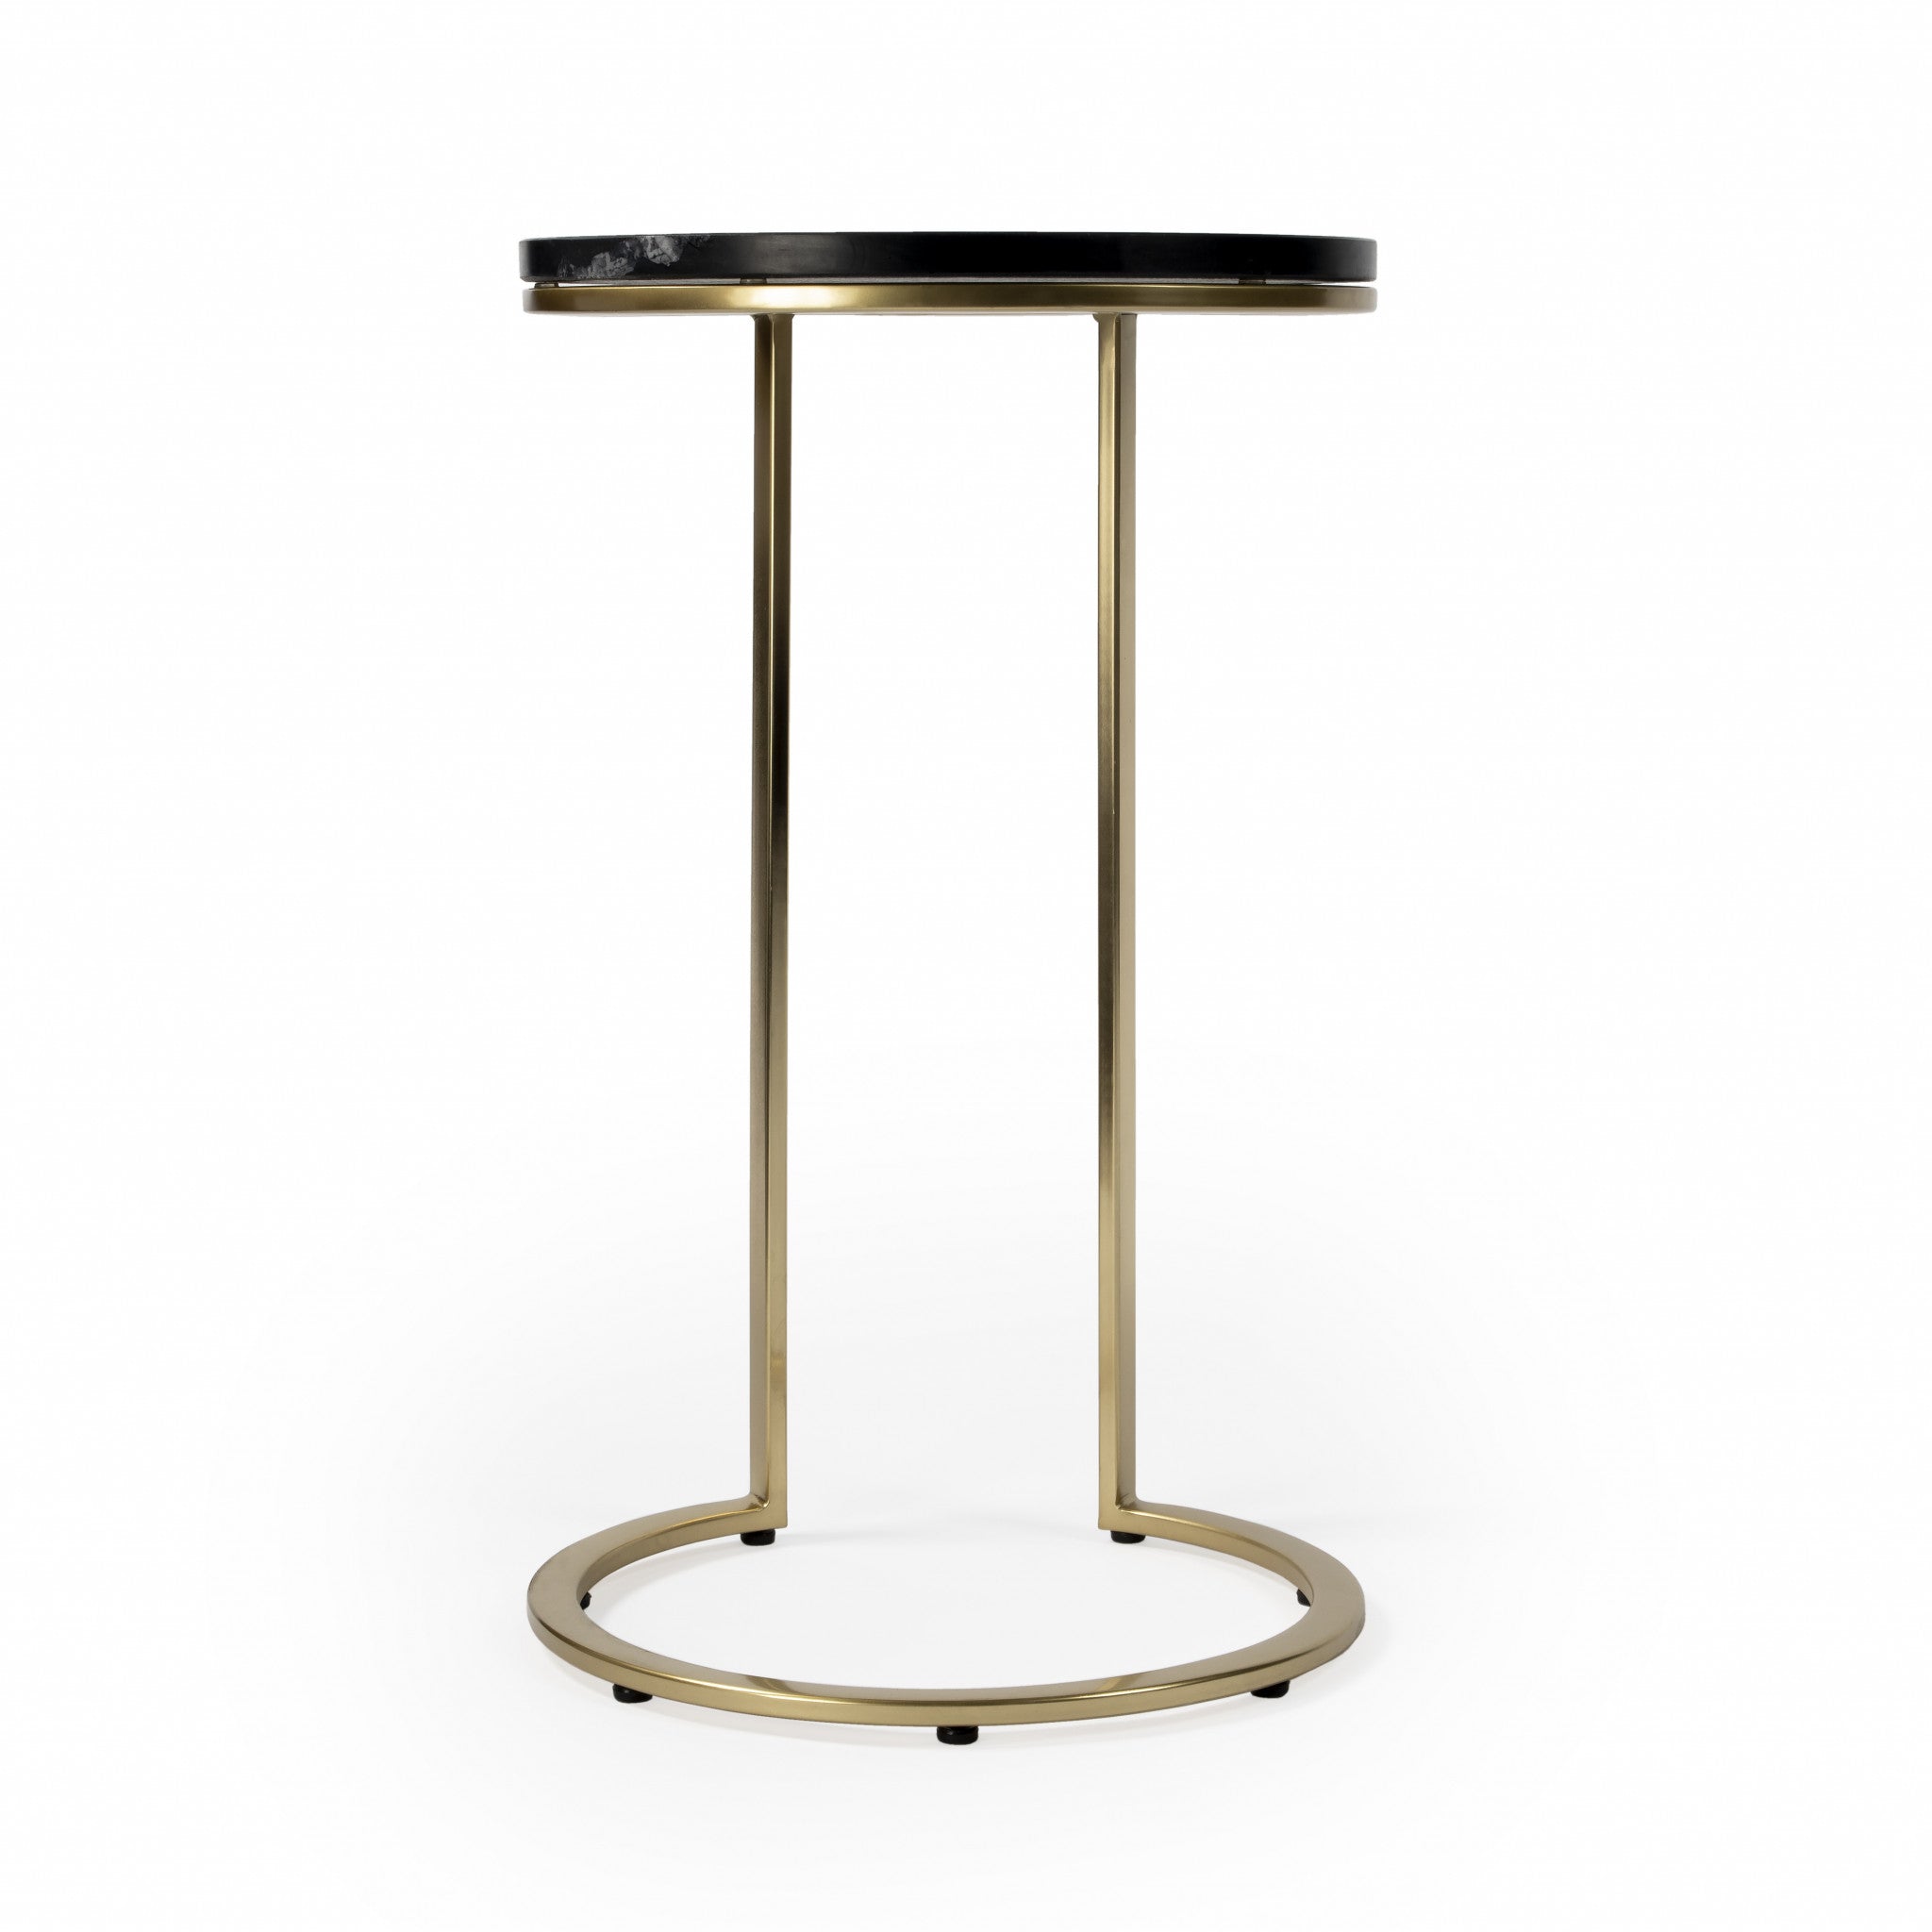 28" Black Marble Round End Table